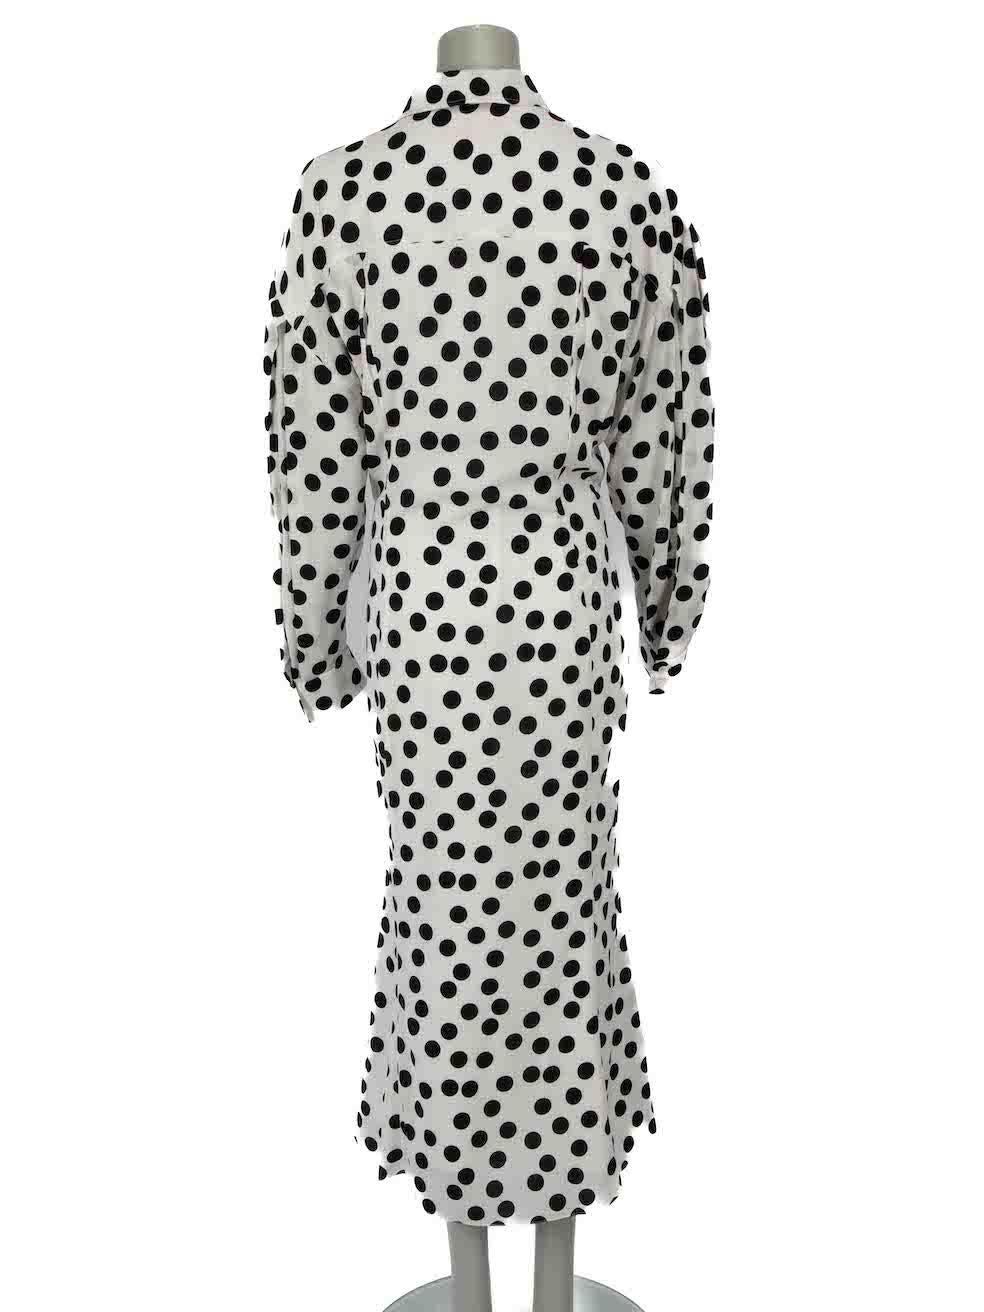 Carolina Herrera White Polka Dot Shirt Dress Size XL In Excellent Condition For Sale In London, GB